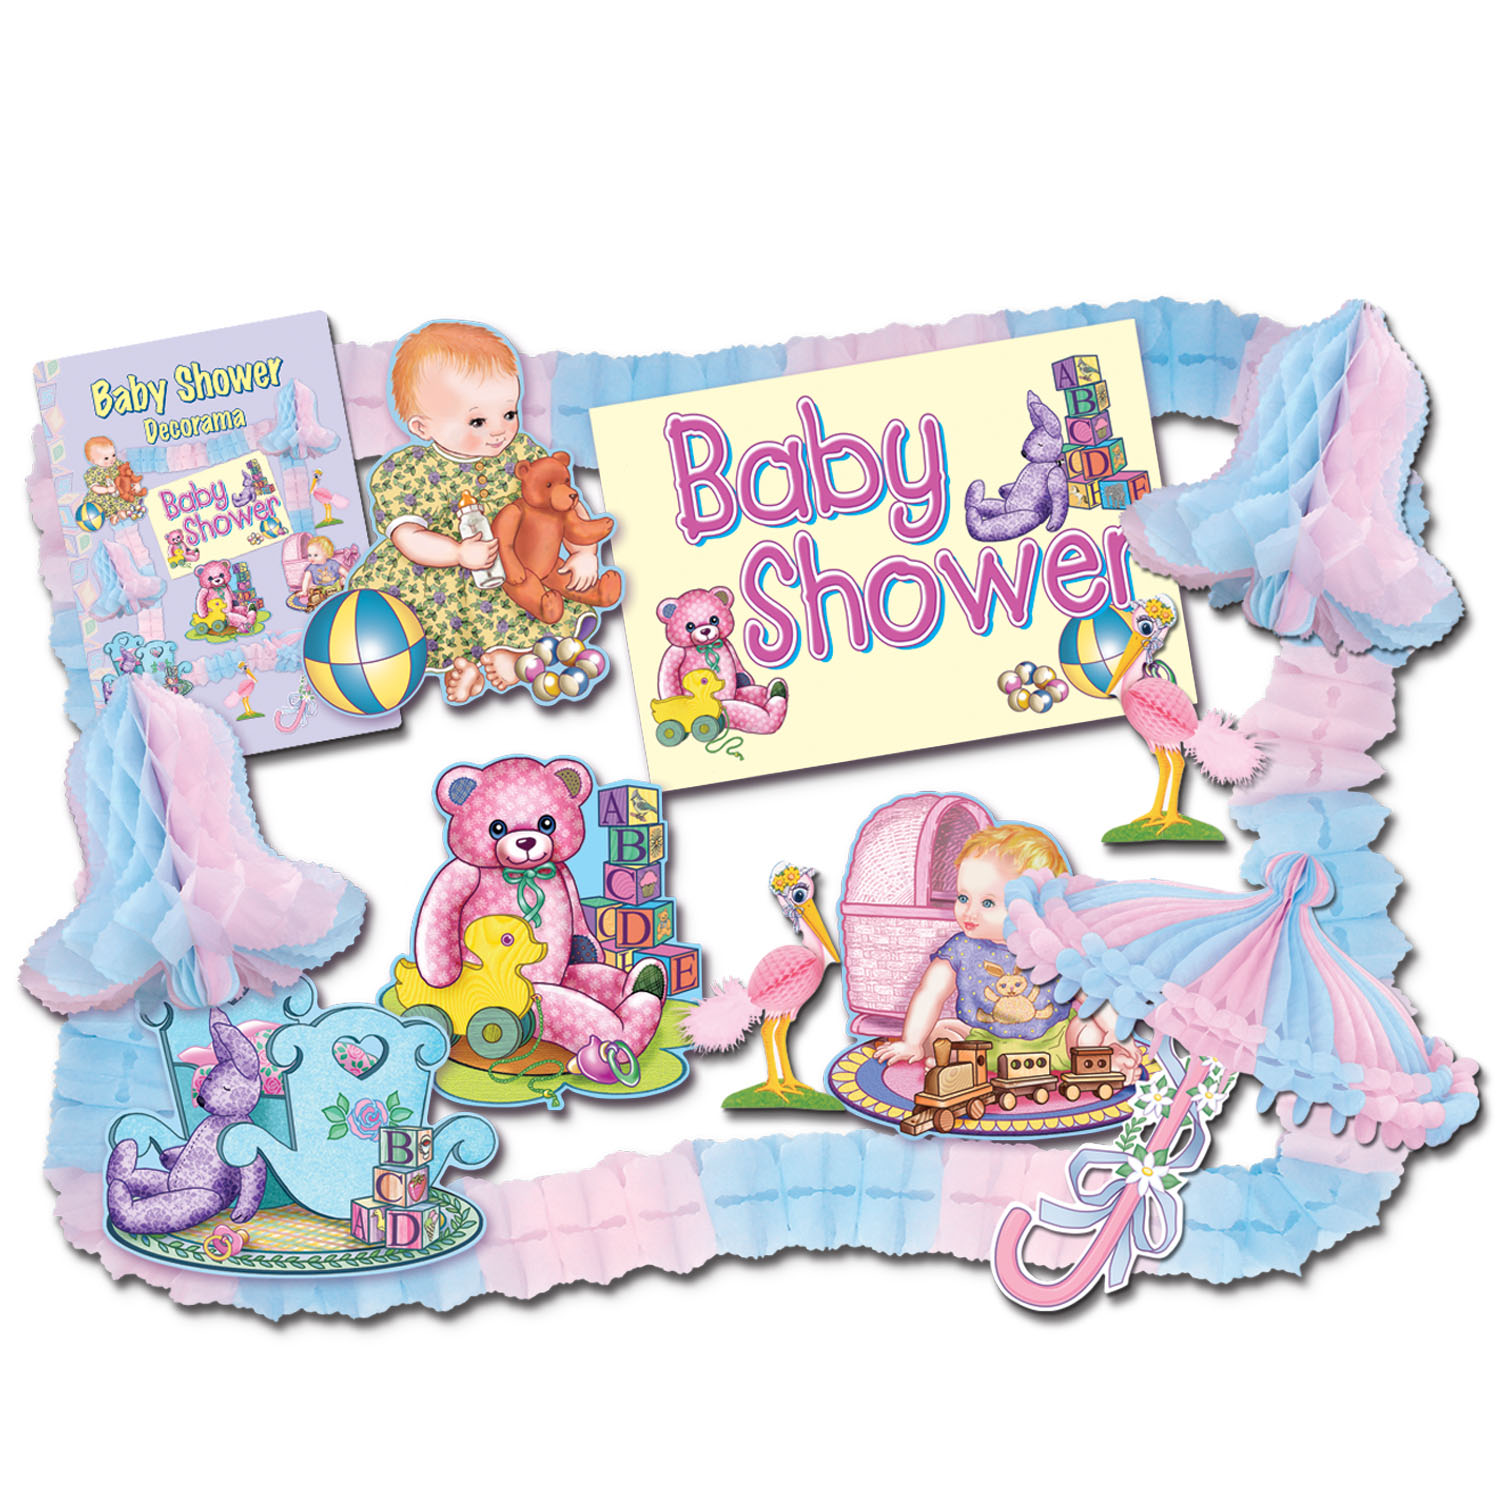 6 Pieces of Baby Shower Party Kit